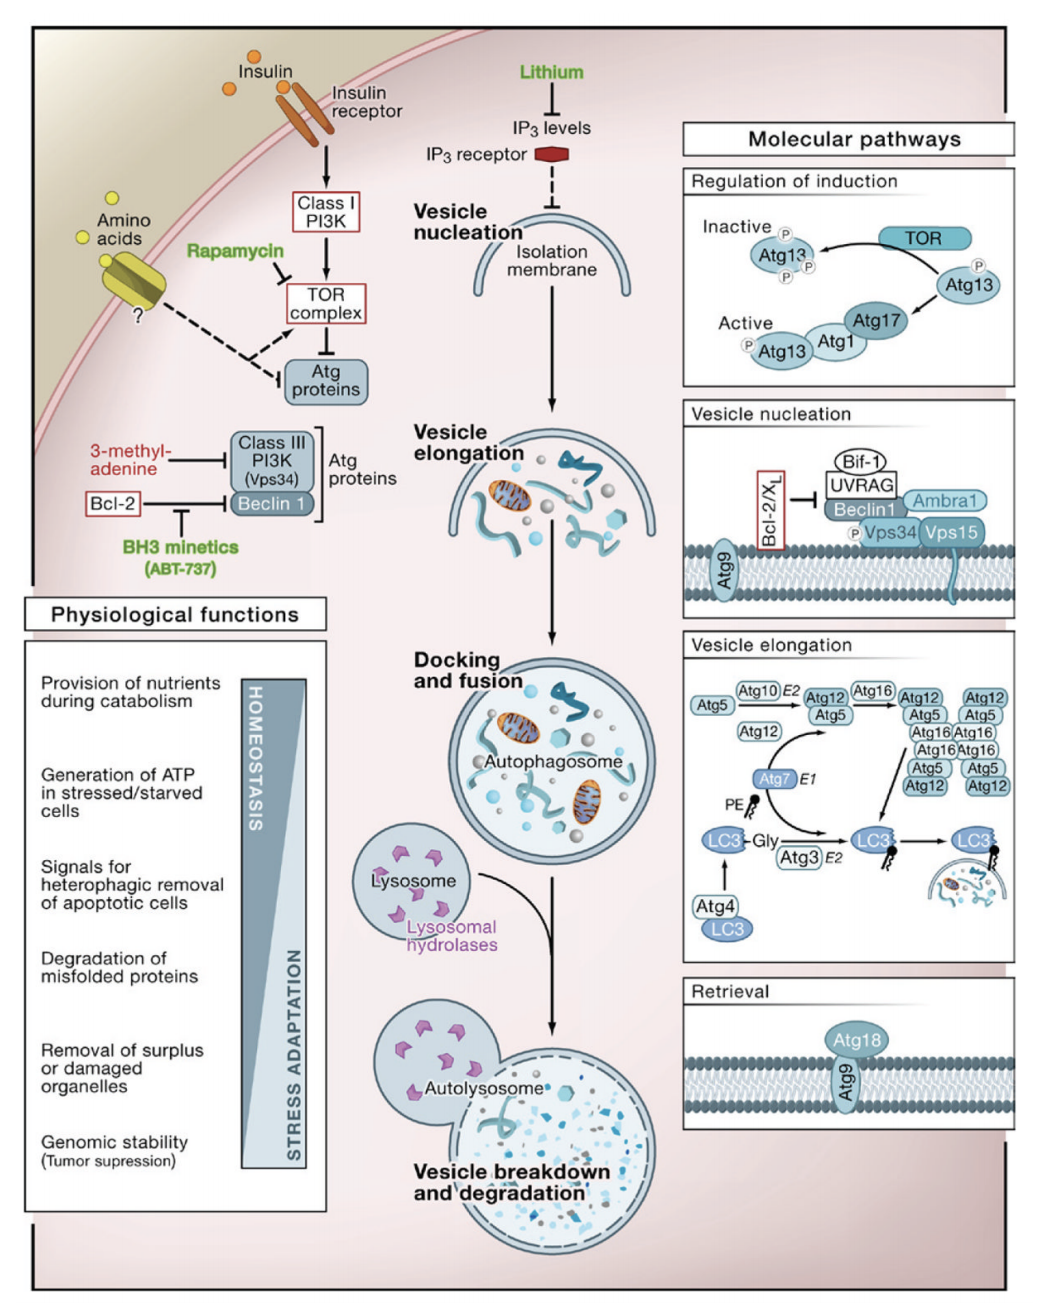  The Cellular, Molecular, and Physiological Aspects of Autophagy